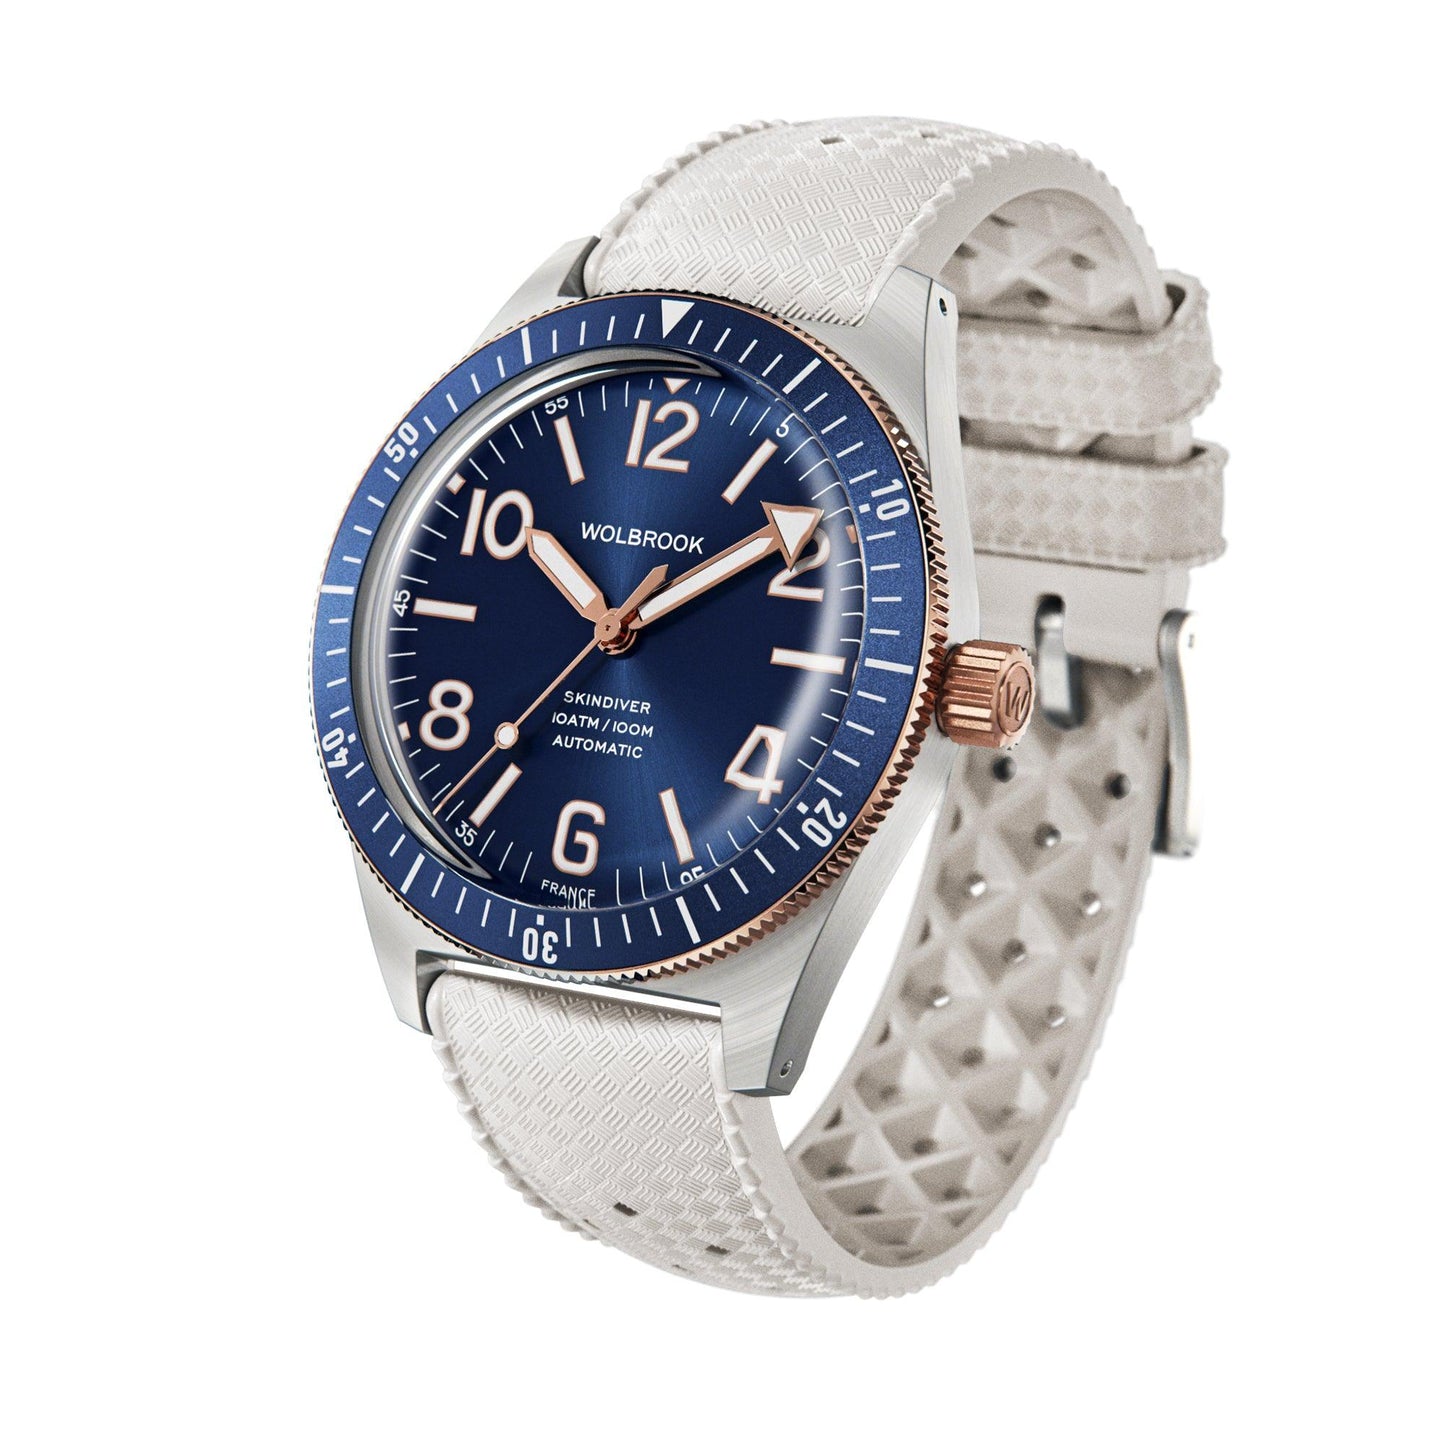 Skindiver Automatic Watch – Two-Tone Blue Sunray & White